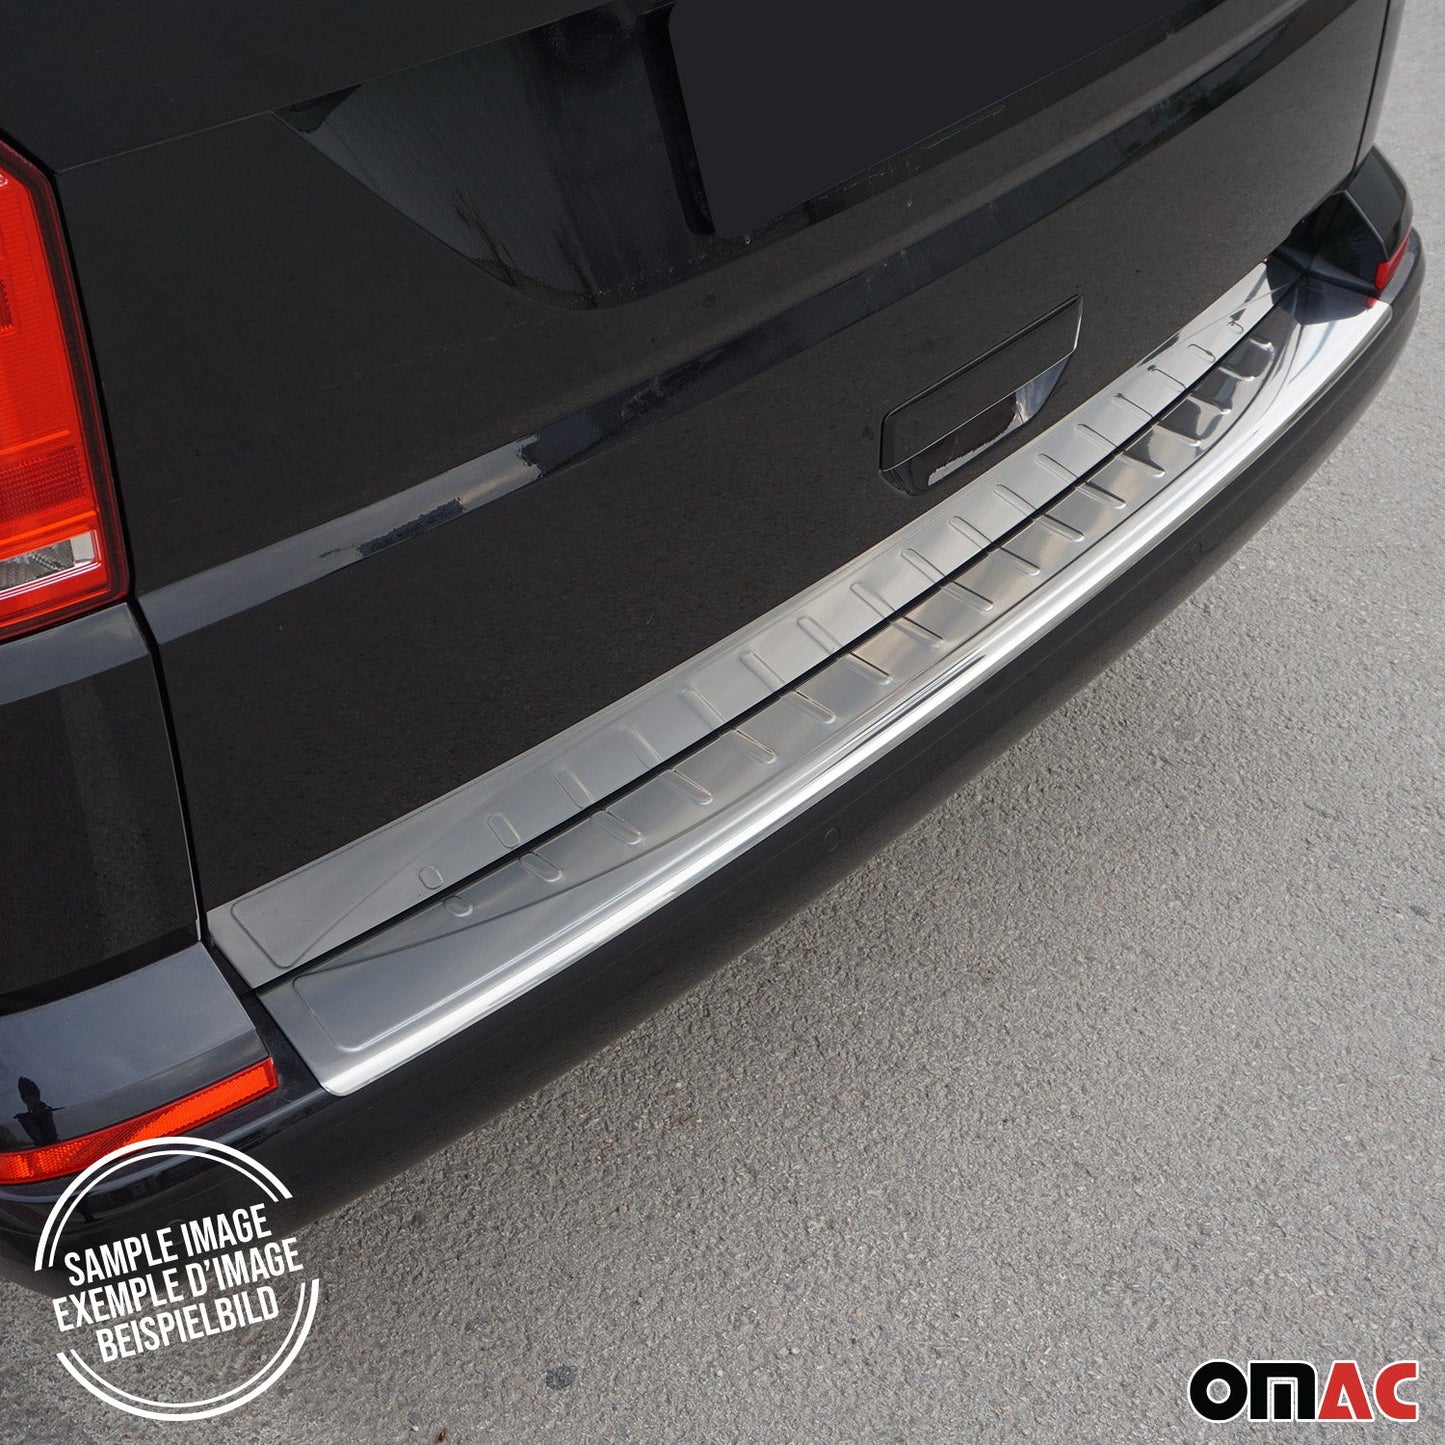 OMAC Rear Bumper Sill Cover Protector Guard for Toyota RAV4 2019-2024 Stainless Steel K-7035093